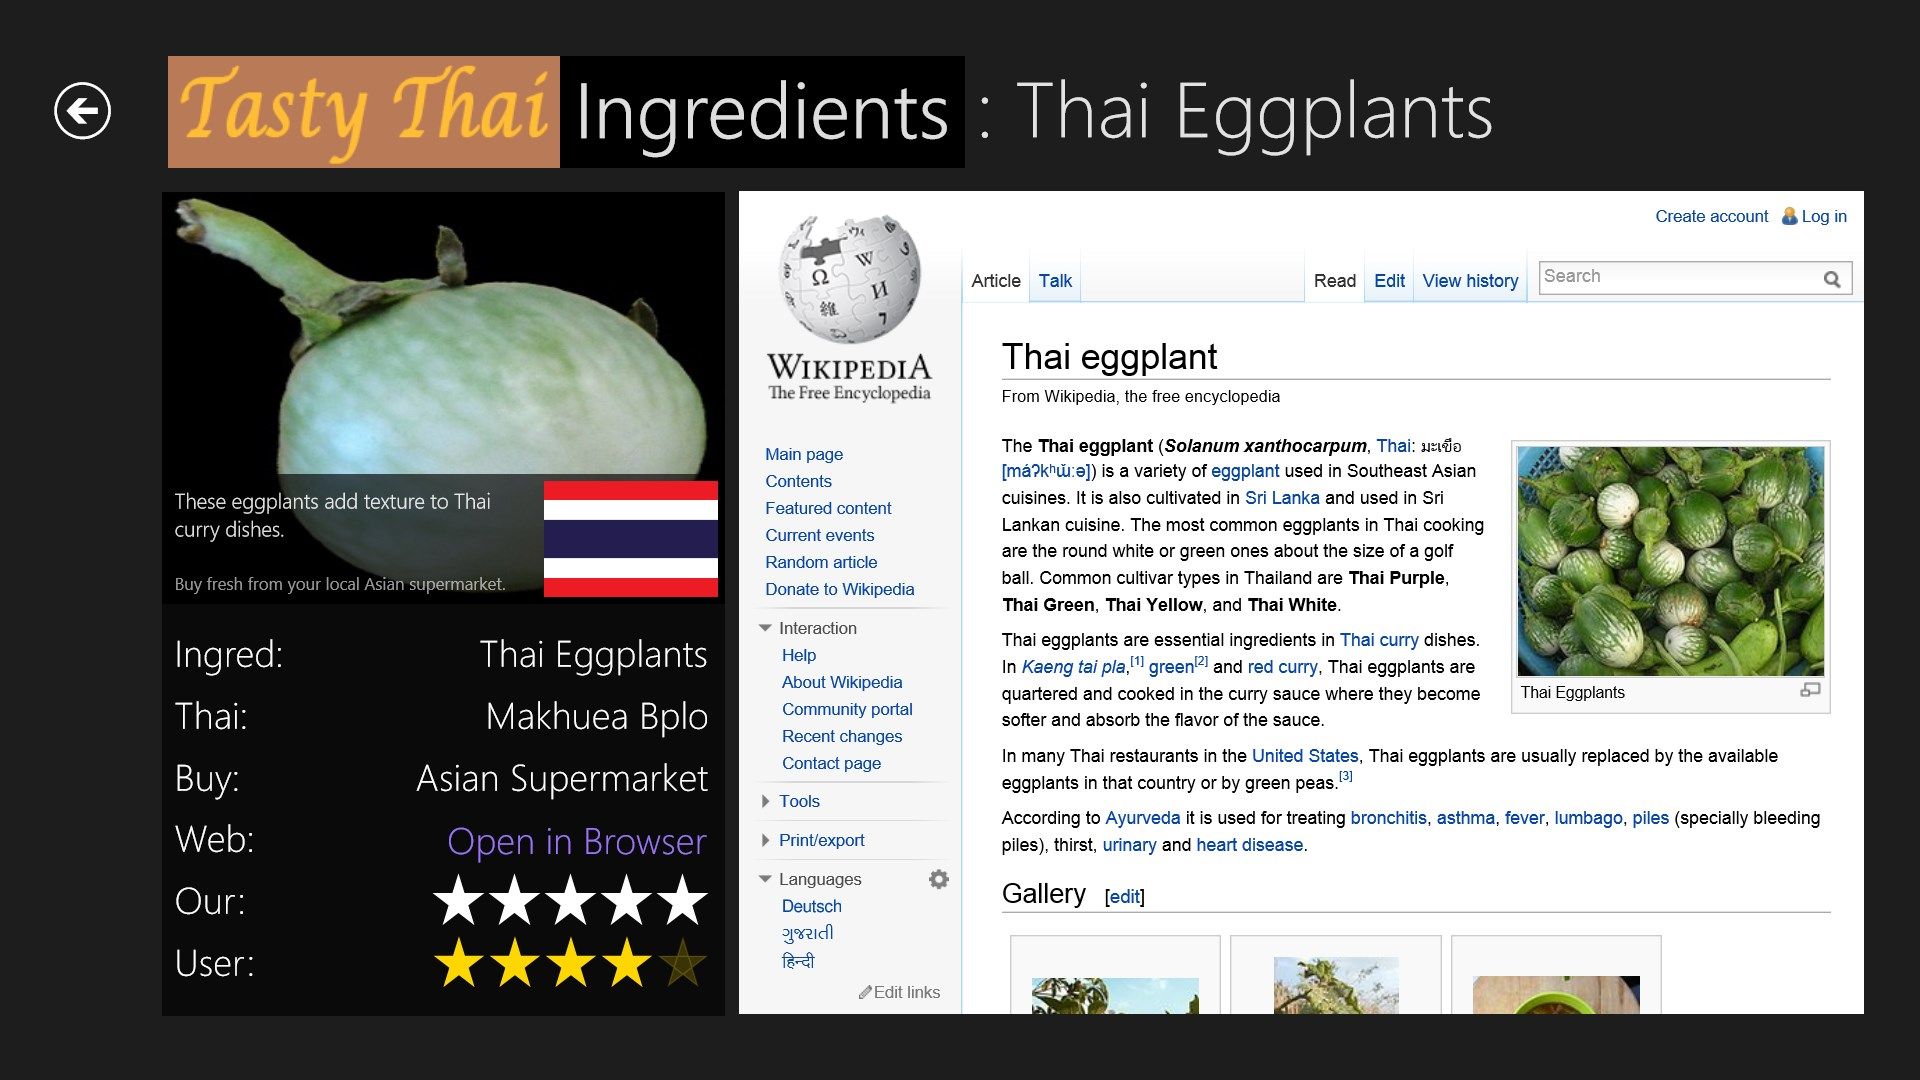 The Ingredients detail screen provides helpful background information.